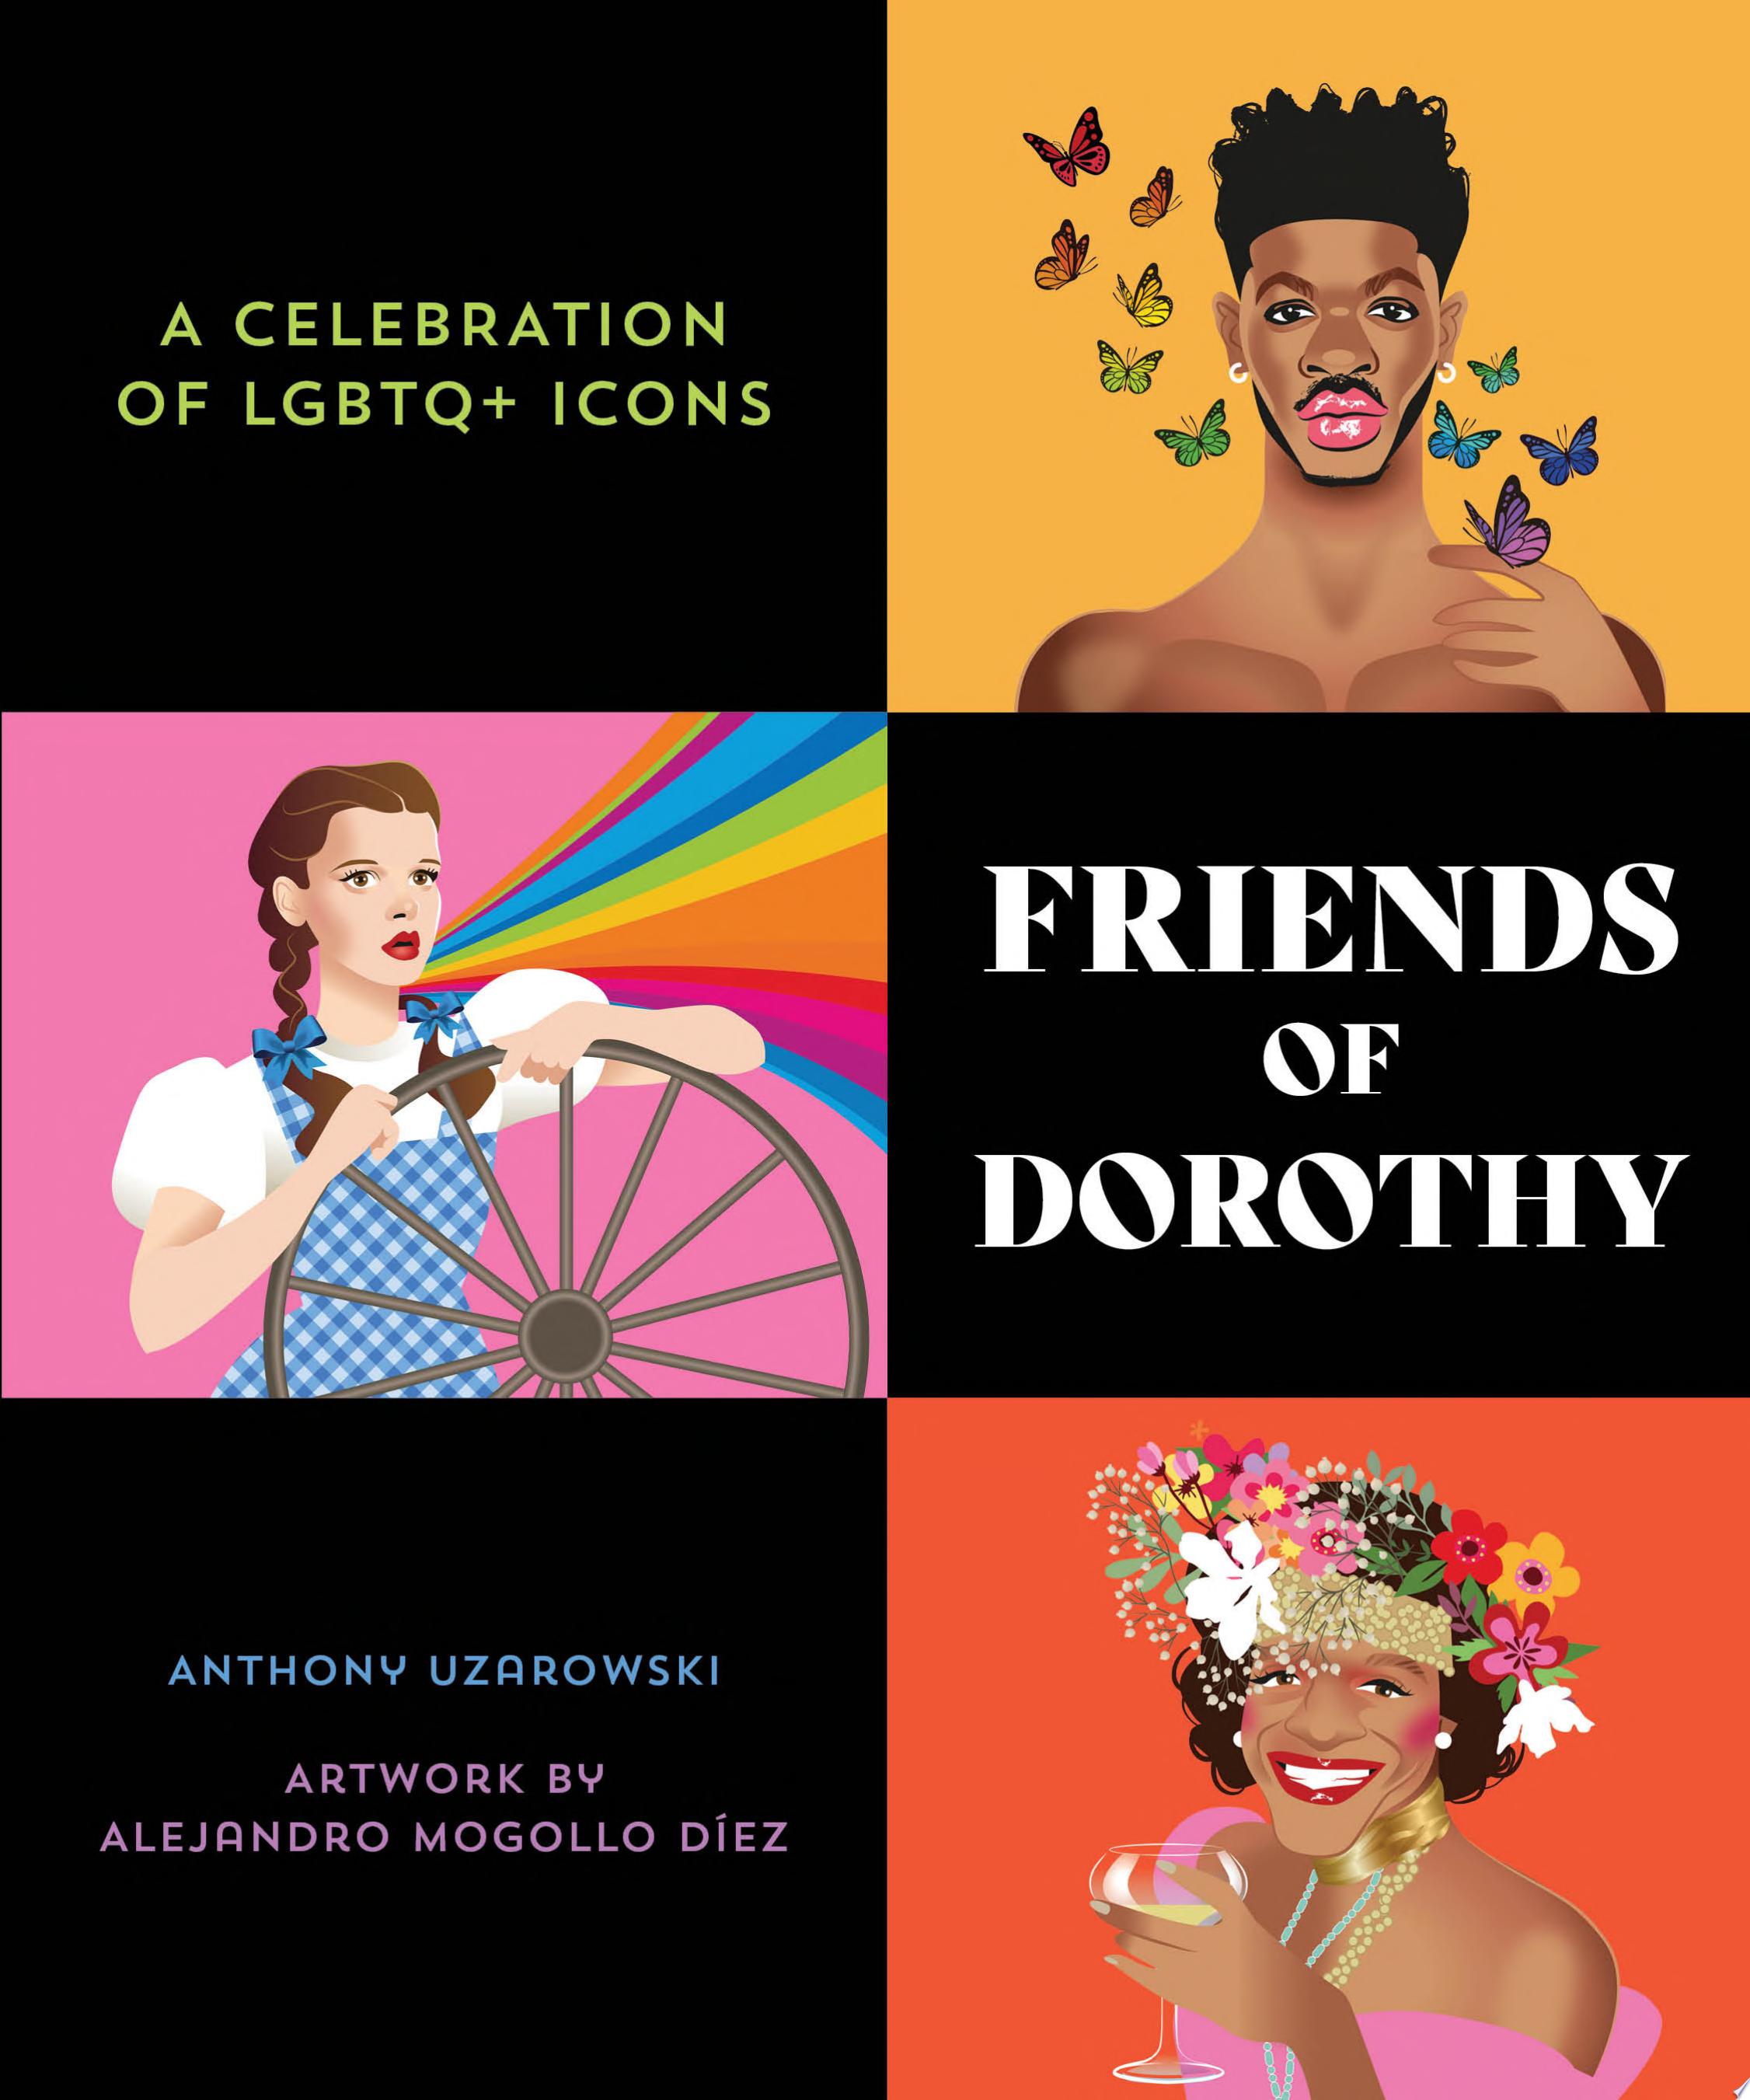 Image for "Friends of Dorothy"